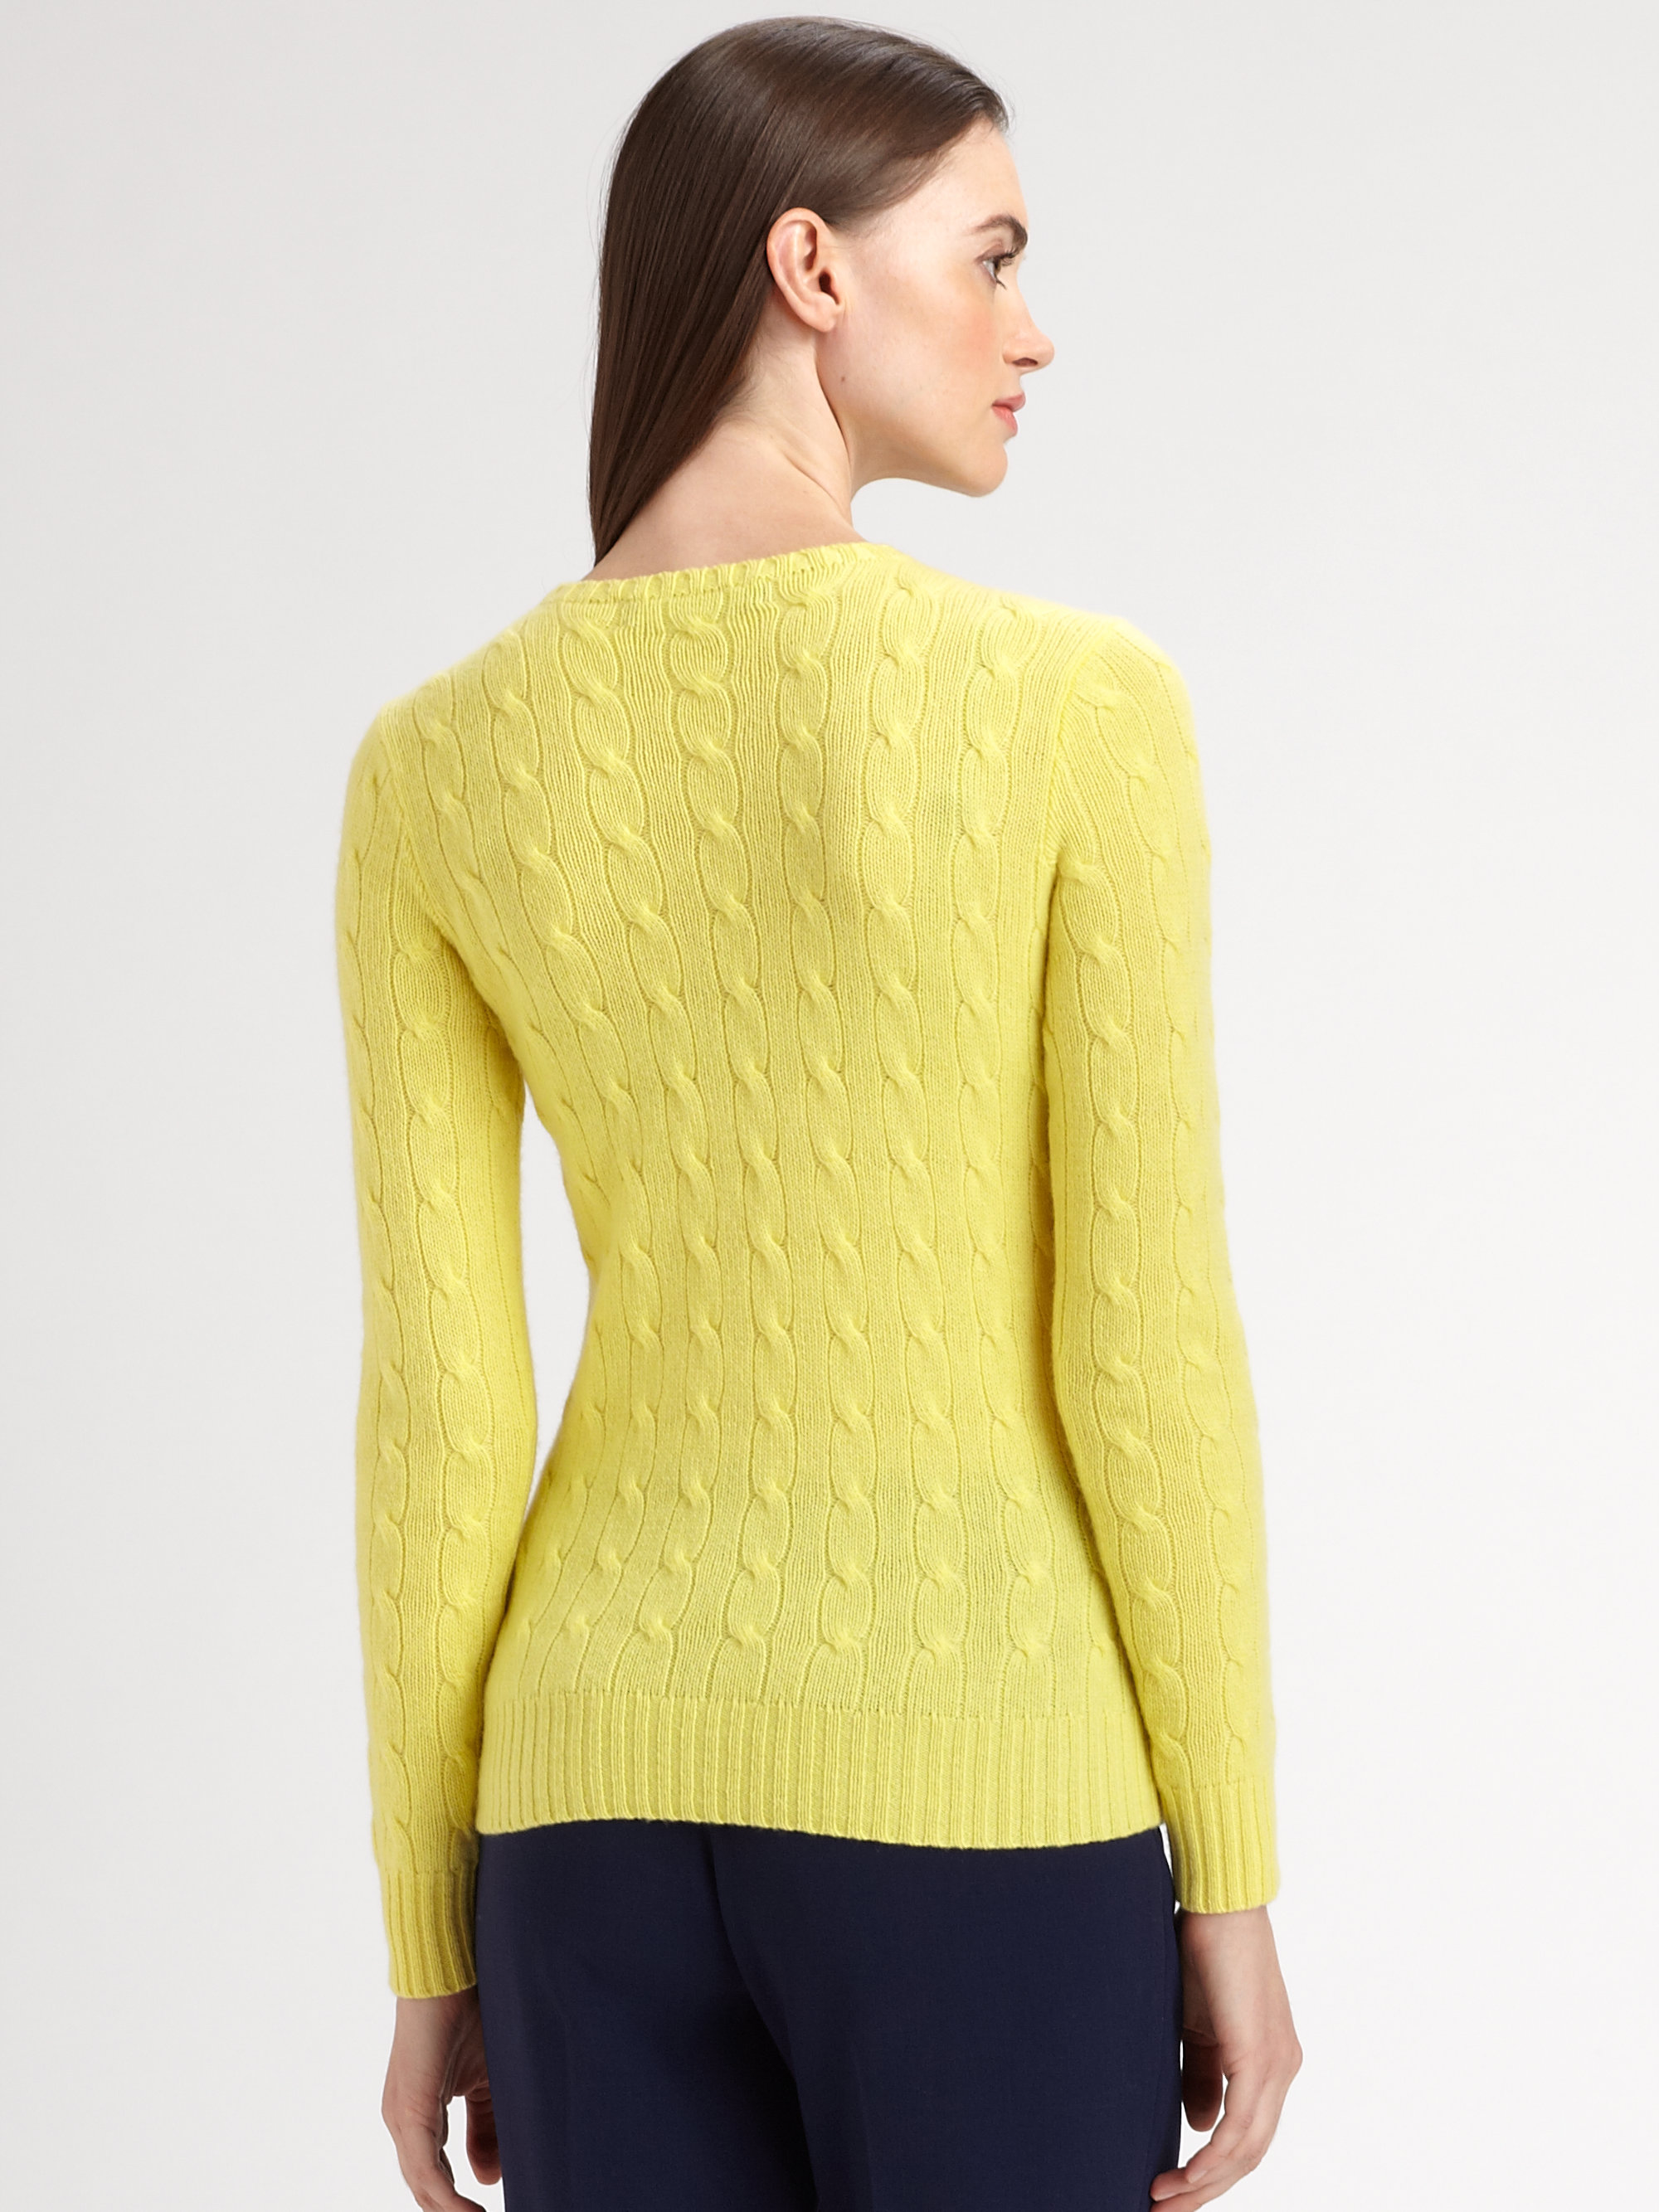 Ralph Lauren Black Label Cable-Knit Cashmere Sweater in Yellow | Lyst